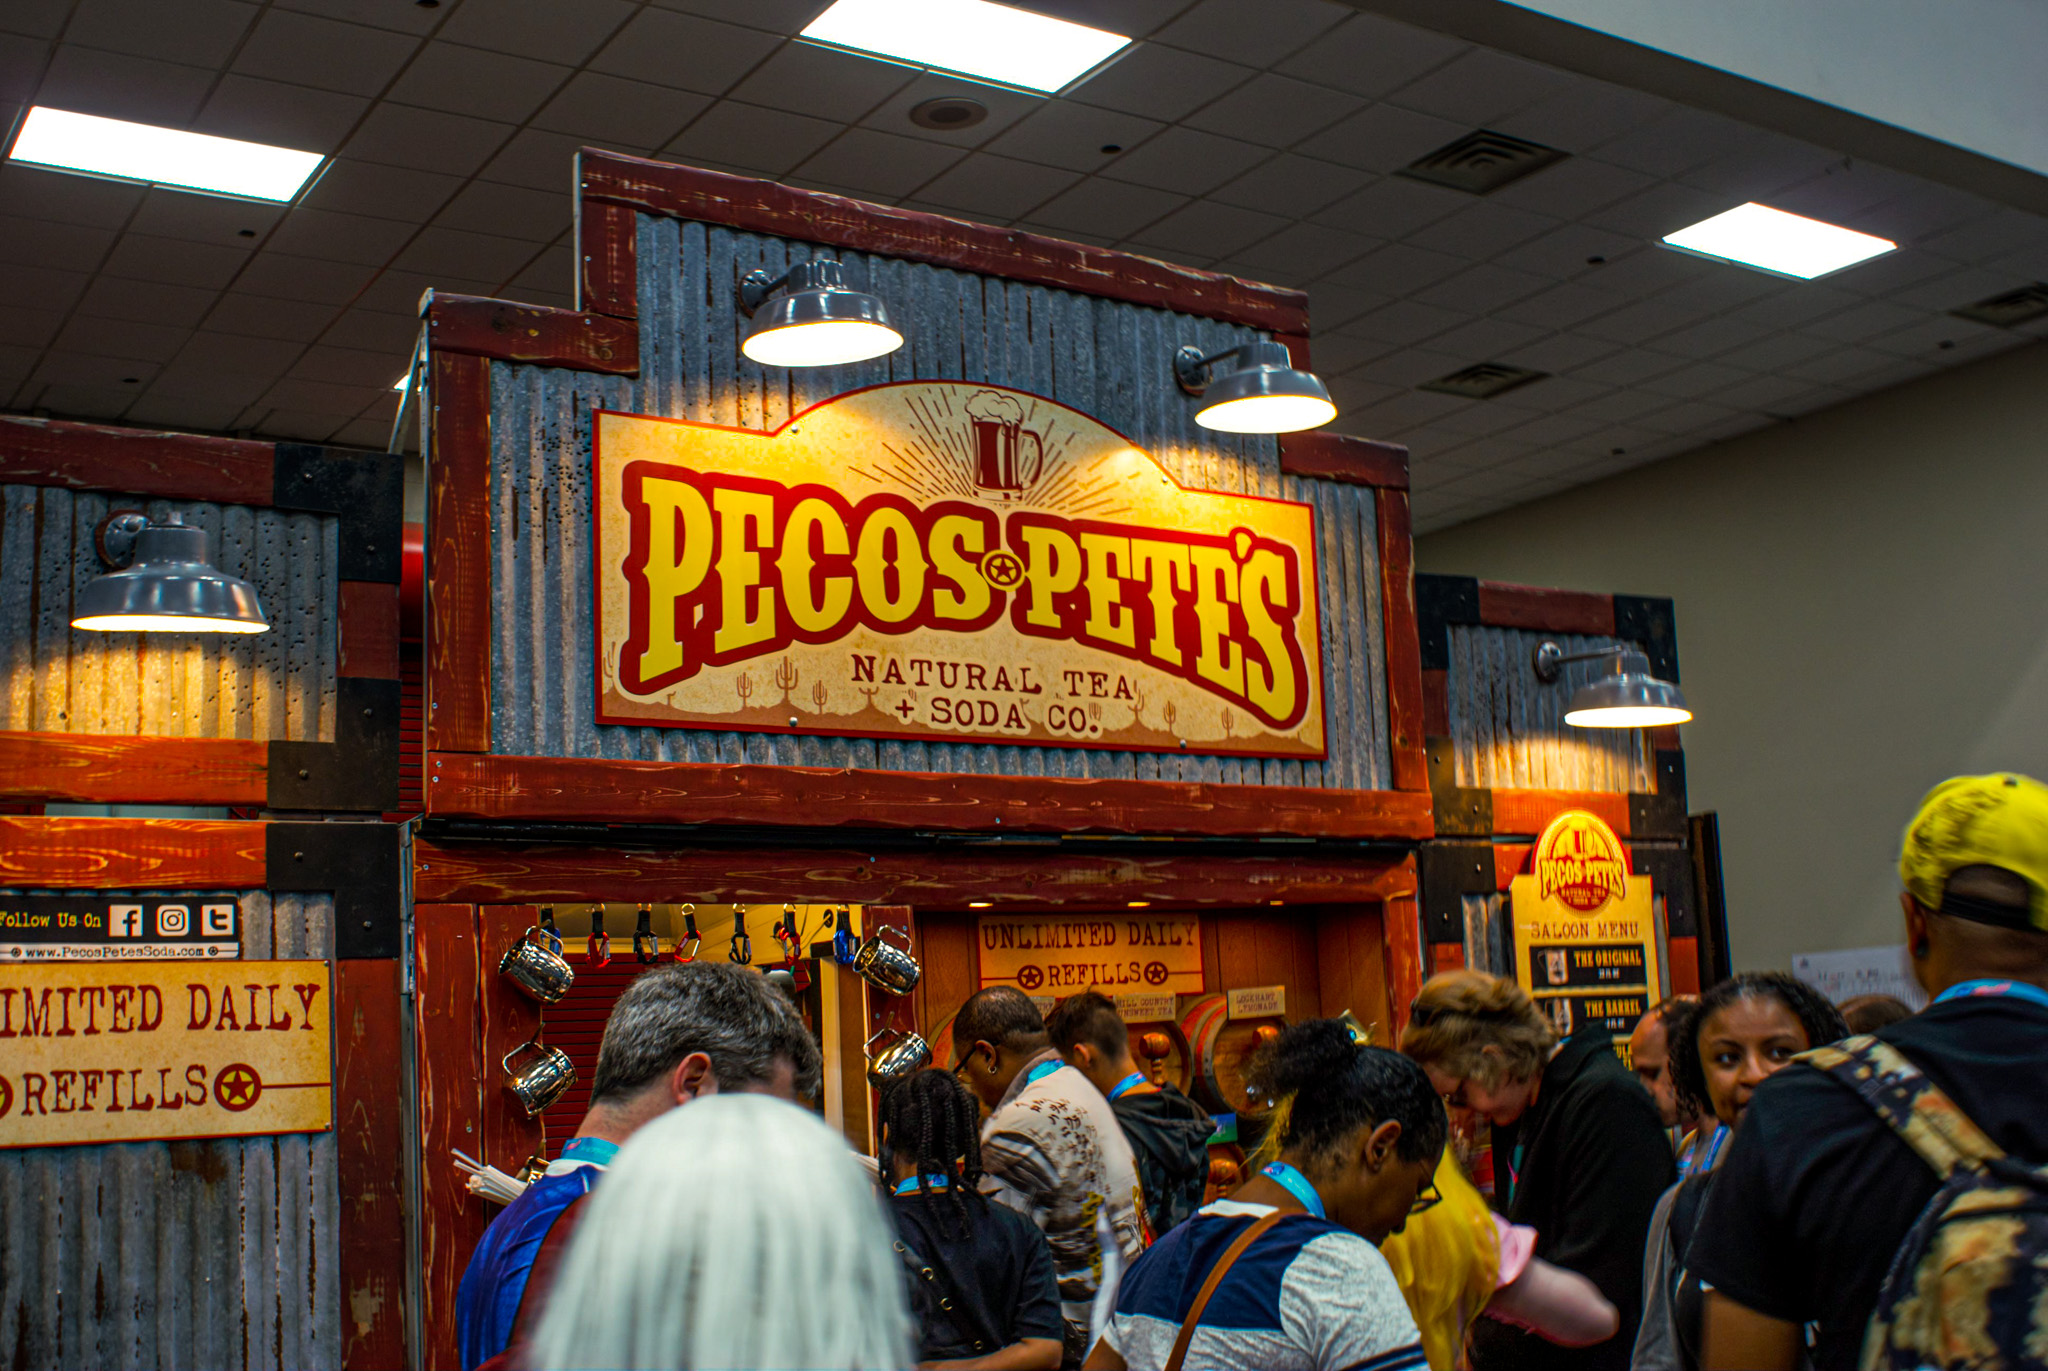 Another familiar face to Comicpalooza. Pecos Pete's has been severing their own brand of sodas here at Comicpalooza since this reporters first Comicpalooza back in 2017. Photo by reporter Adan Martinez.